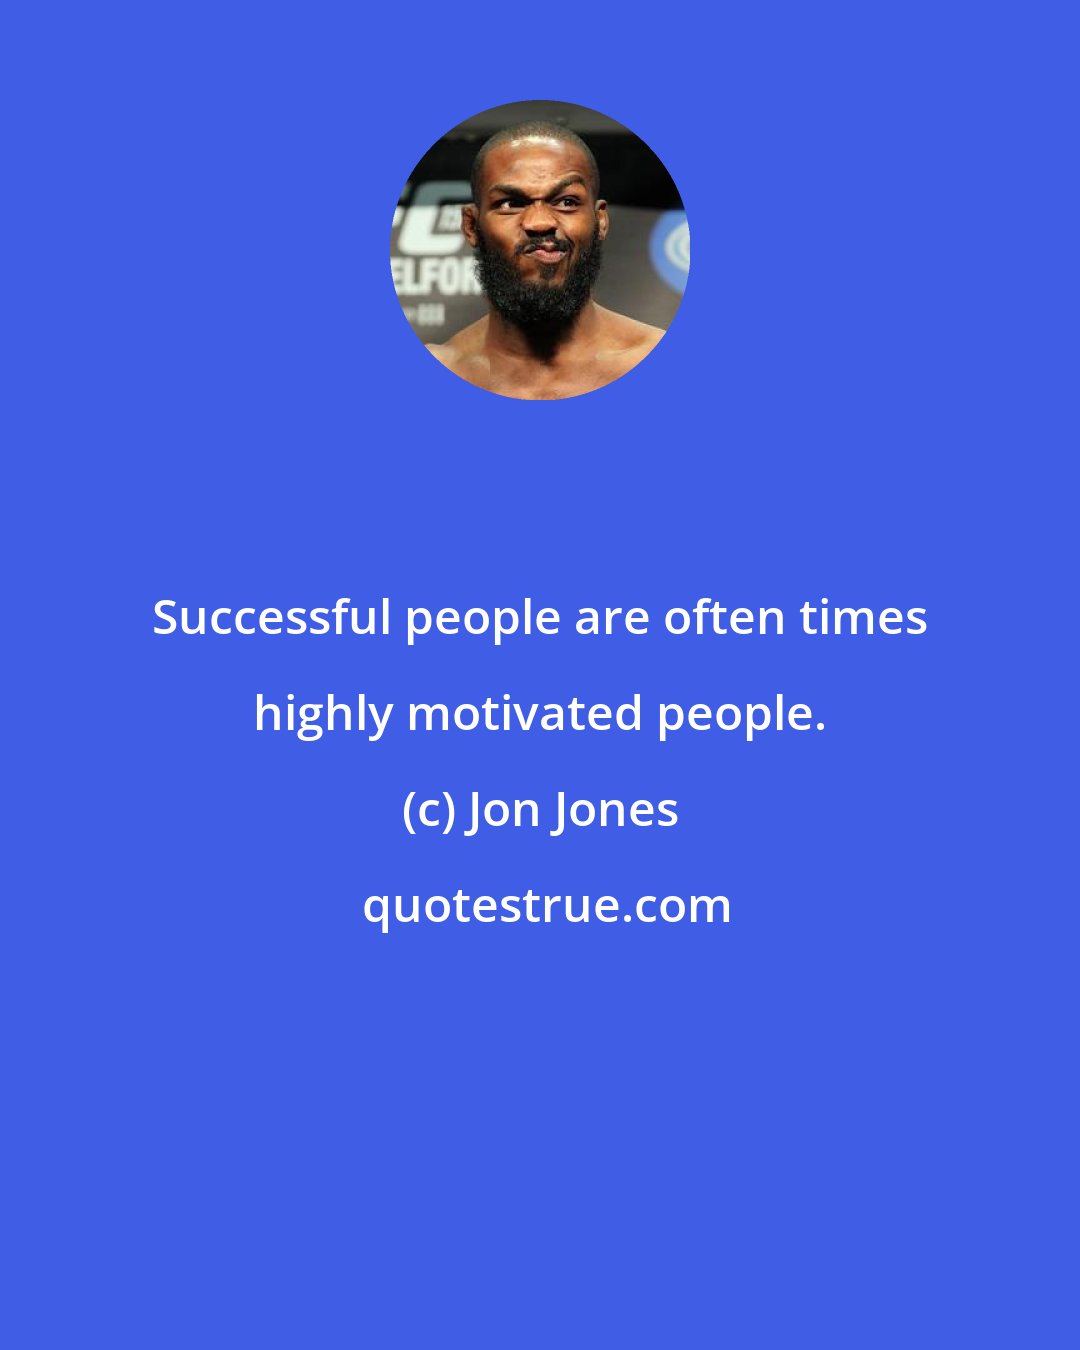 Jon Jones: Successful people are often times highly motivated people.